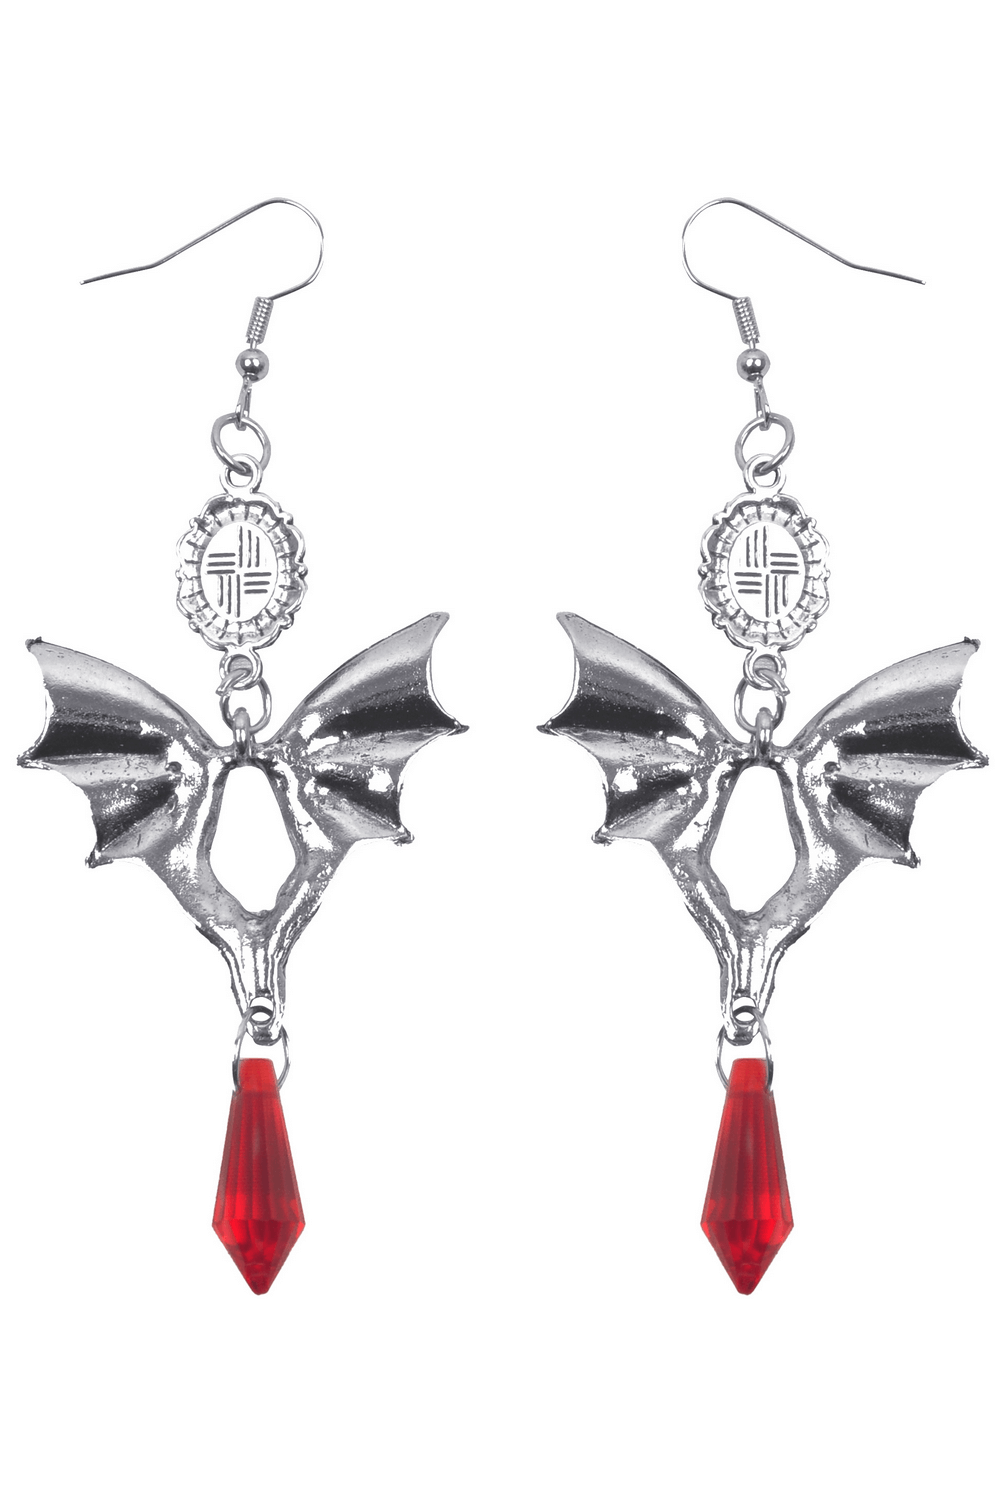 Gothic Bat Wing Earrings with Red Gemstone Accent